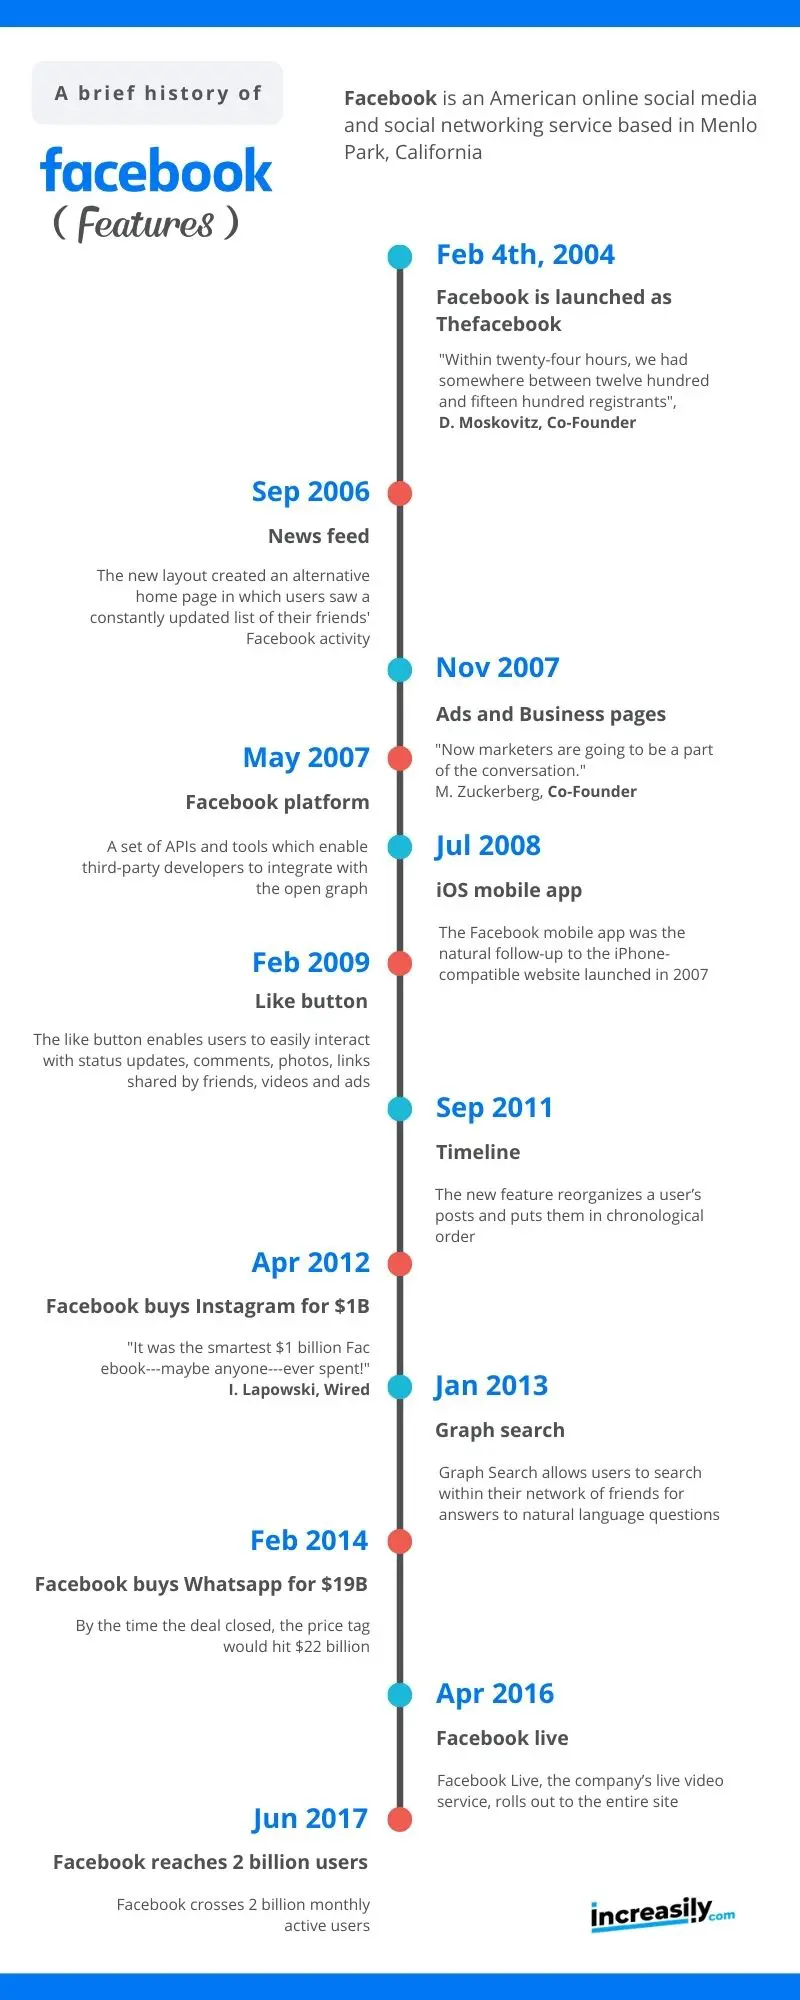 facebook history of features